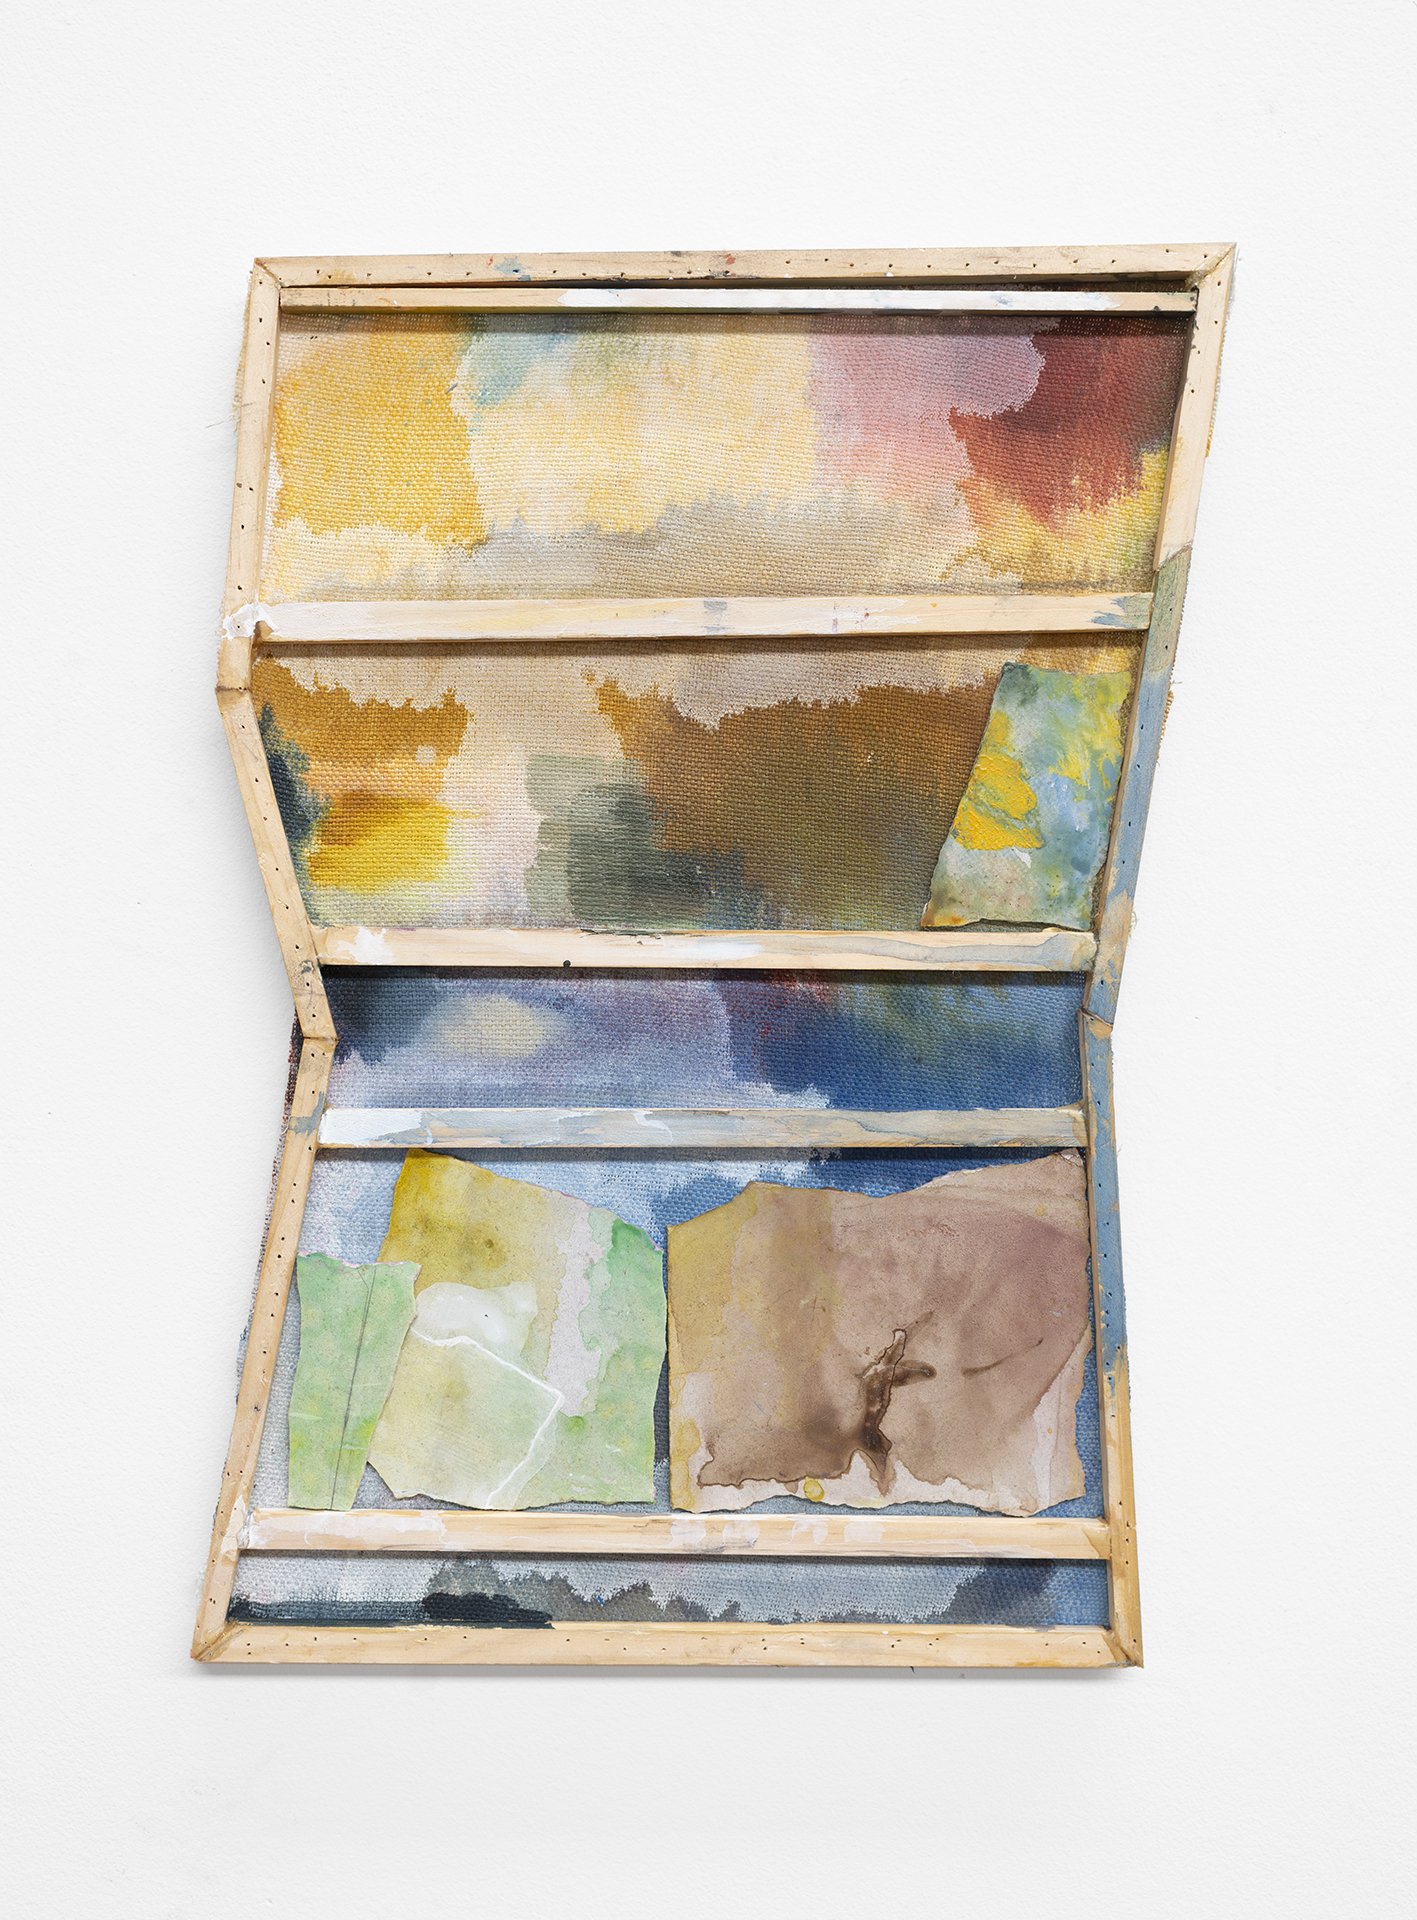  Untitled (quarry), 16 x 10 inches (variable dimensions). Acrylic, graphite, and marble on linen with pine, 2023. 